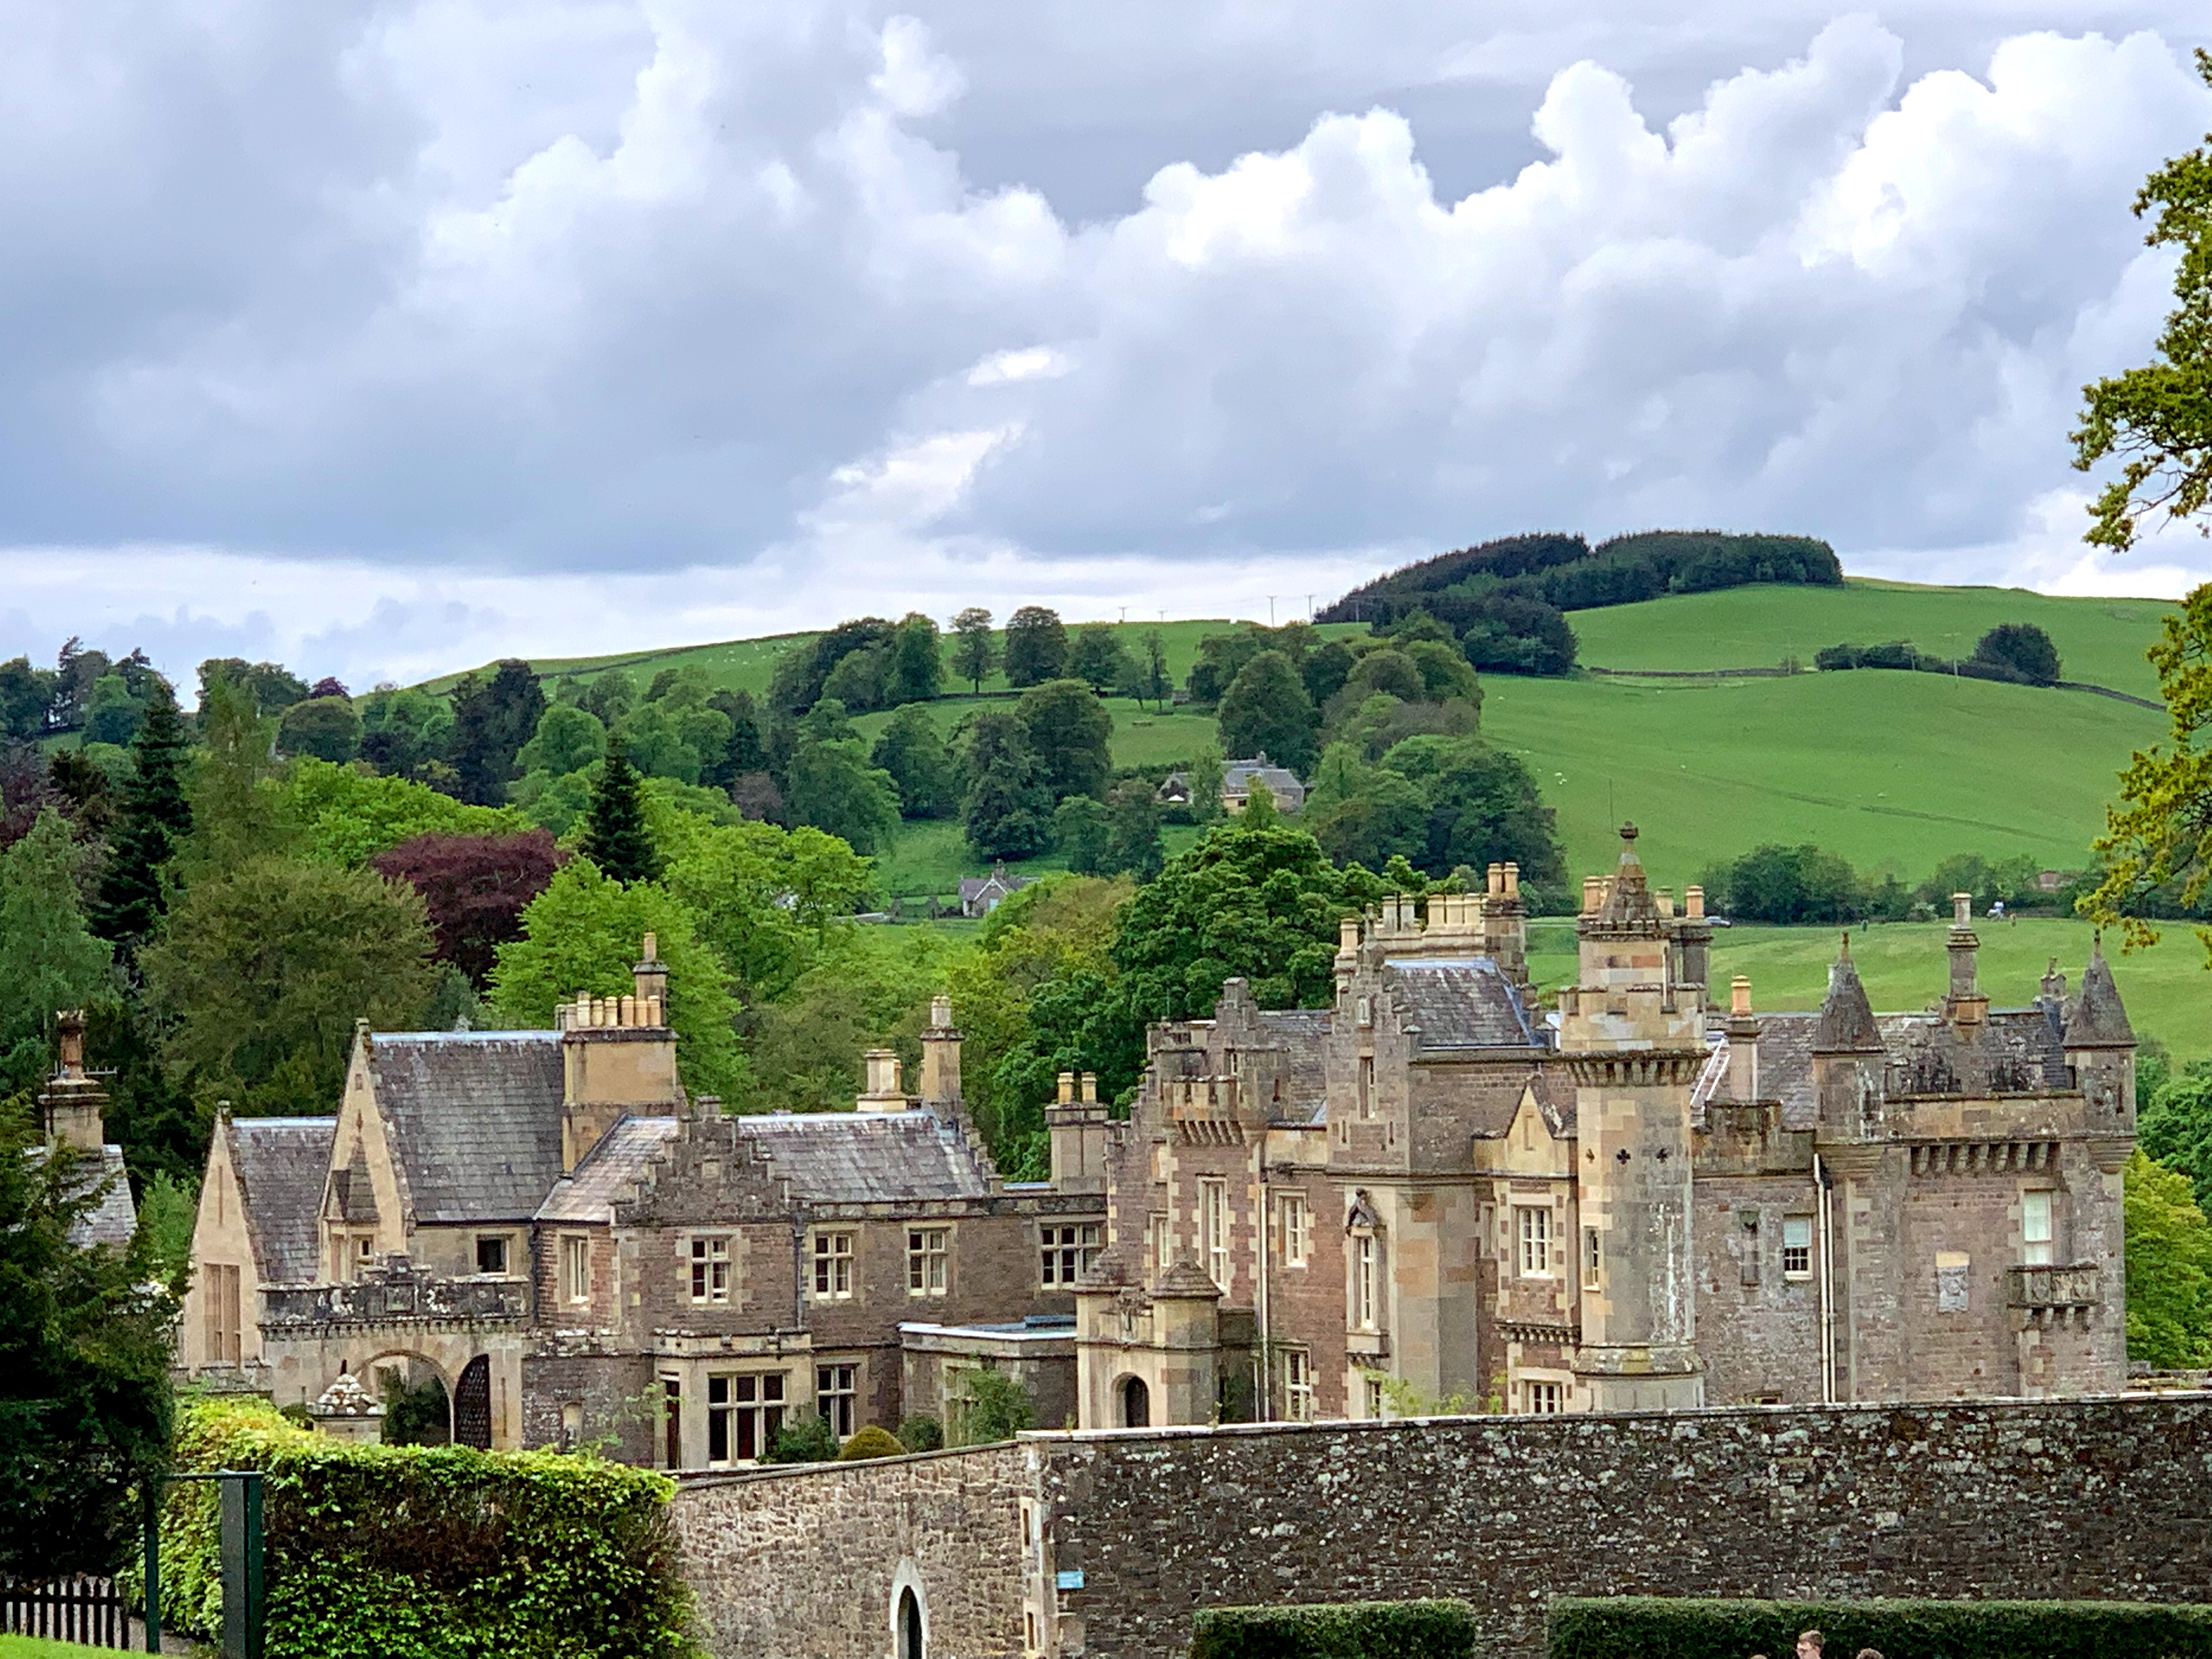 View of Abbotsford House